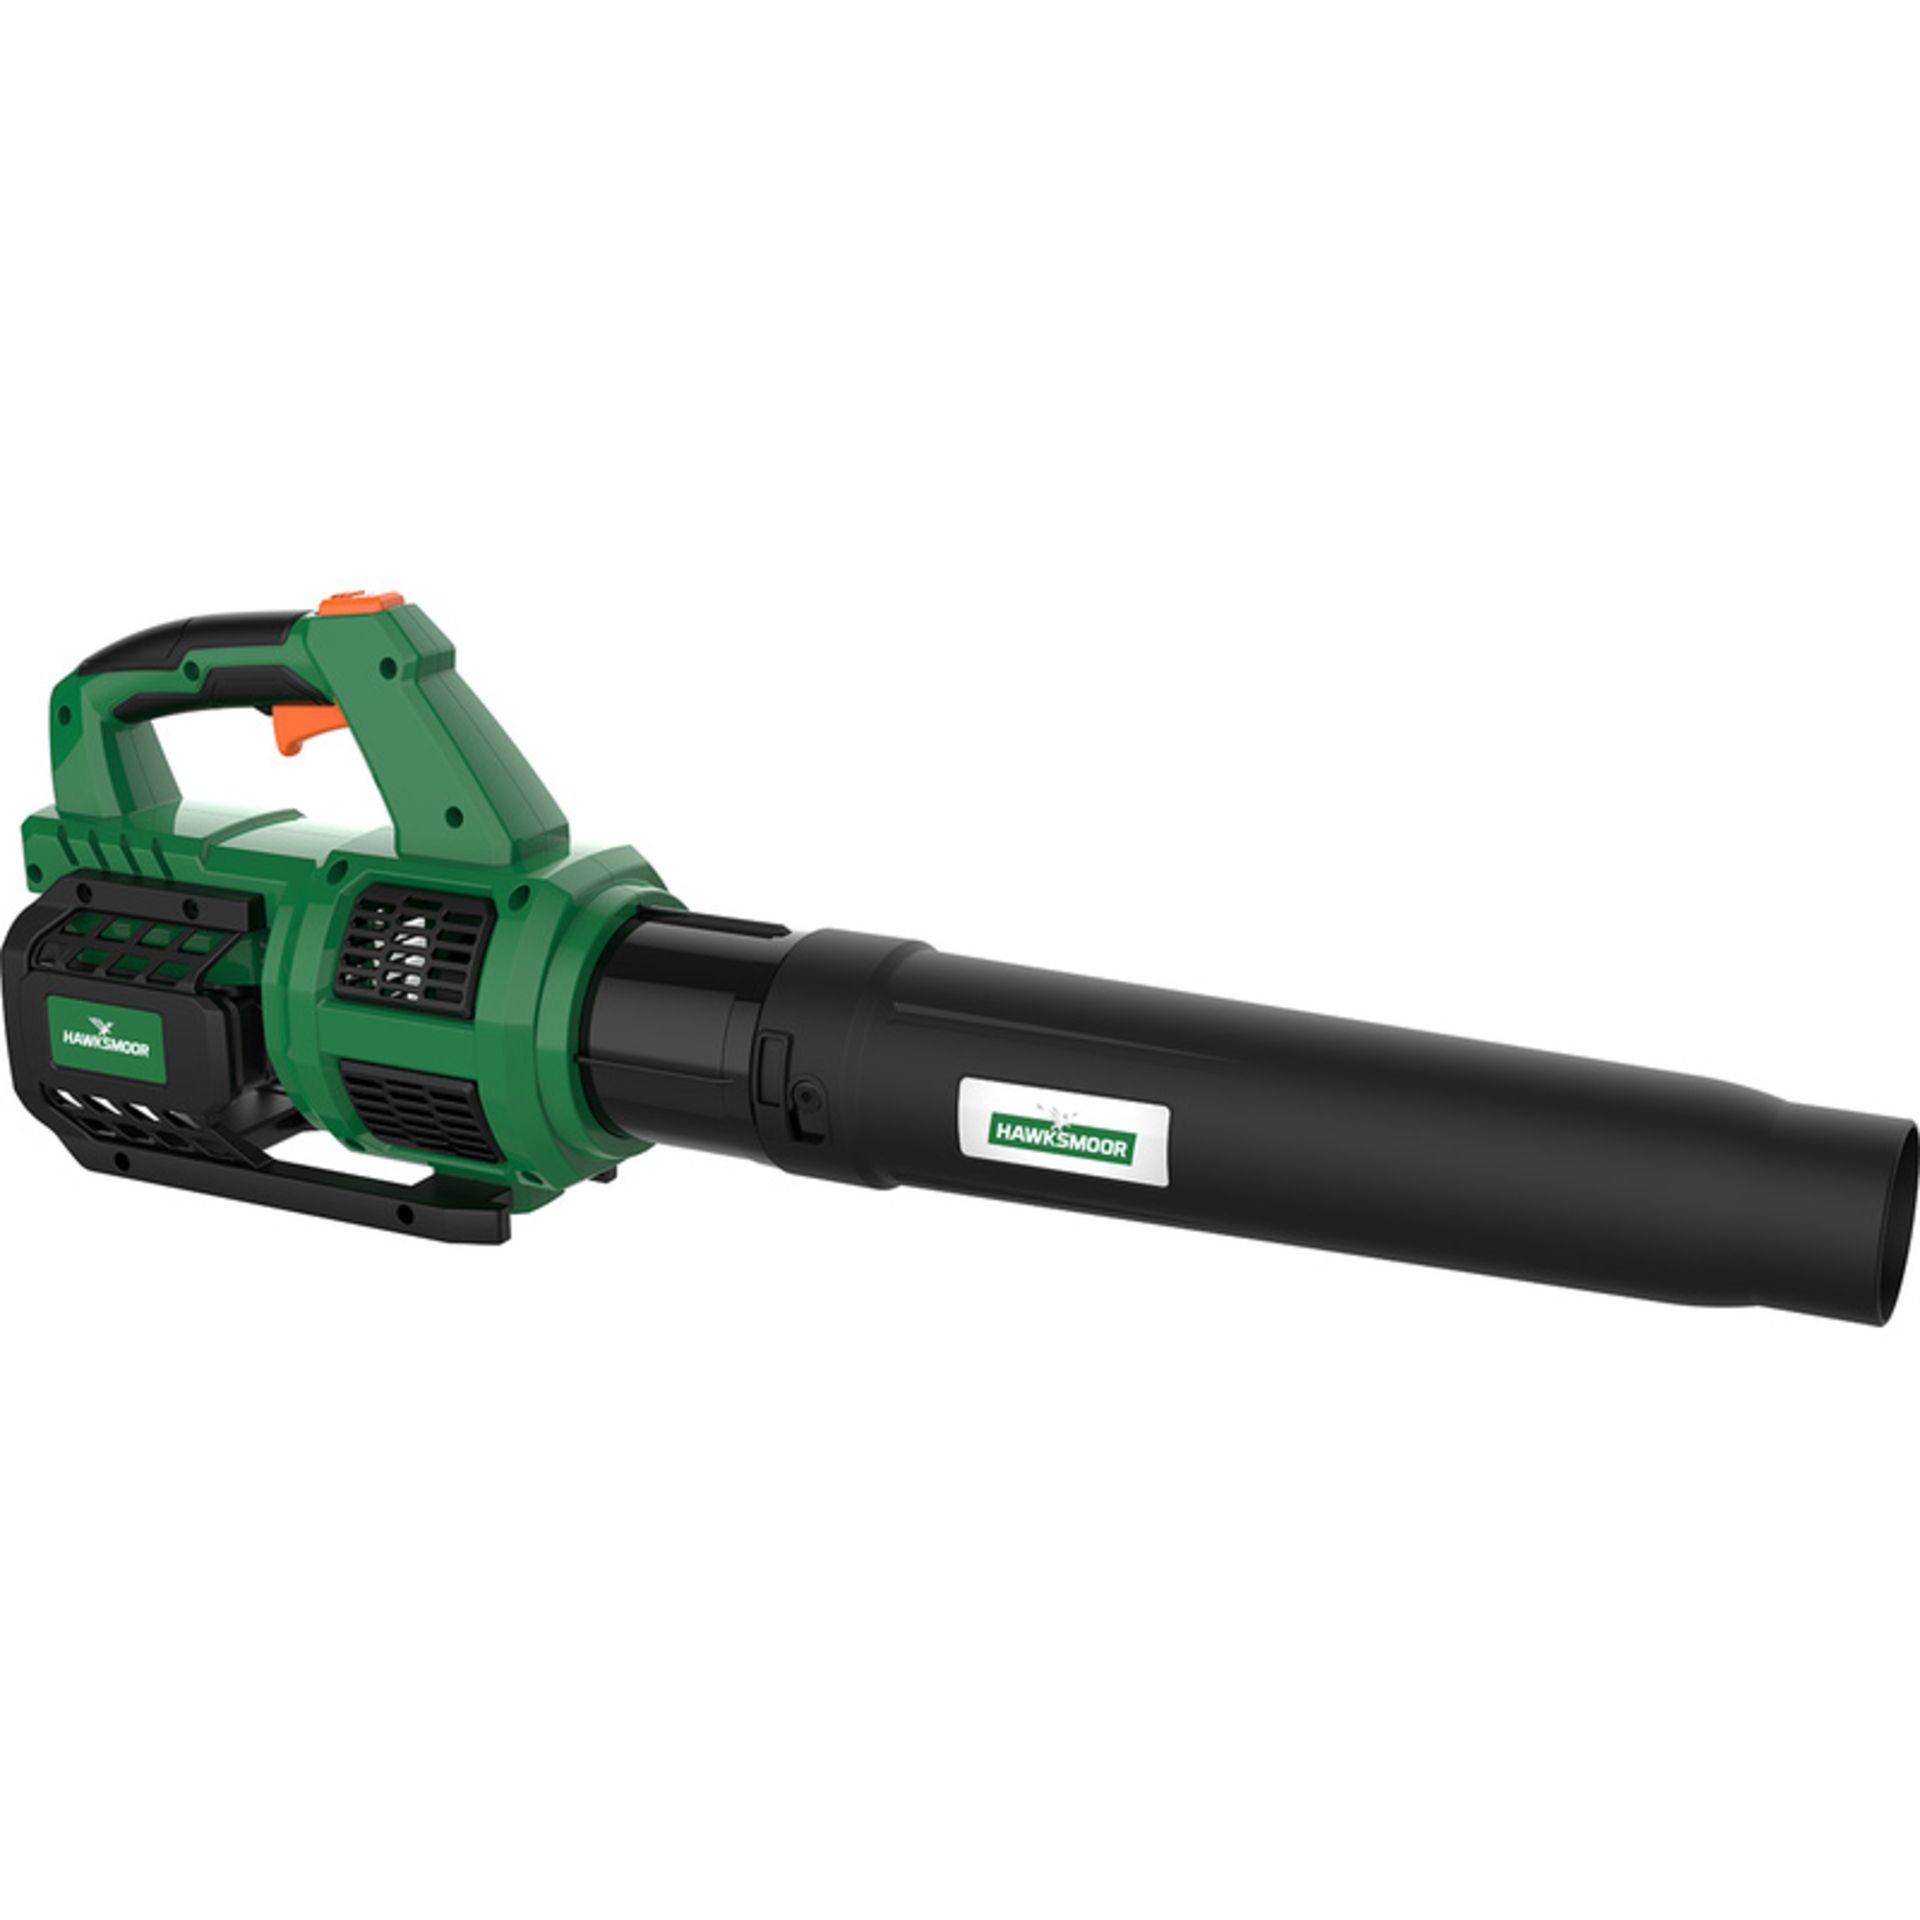 Hawksmoor 18V Cordless Turbine Blower. - ER34. • Comfortable handle with rubber overmold grip, •